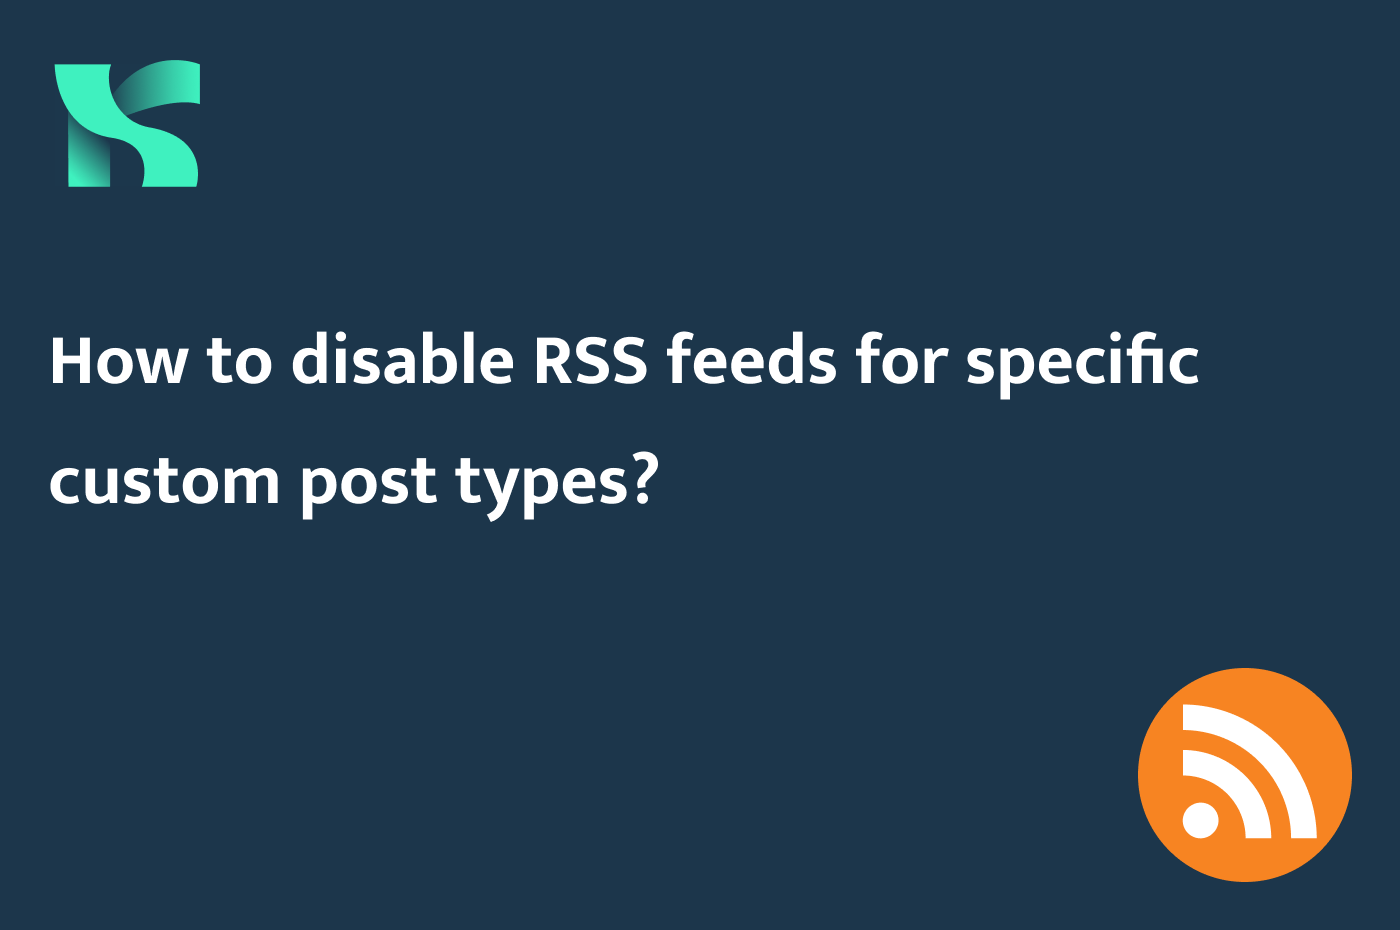 How to disable RSS feeds for specific custom post types?